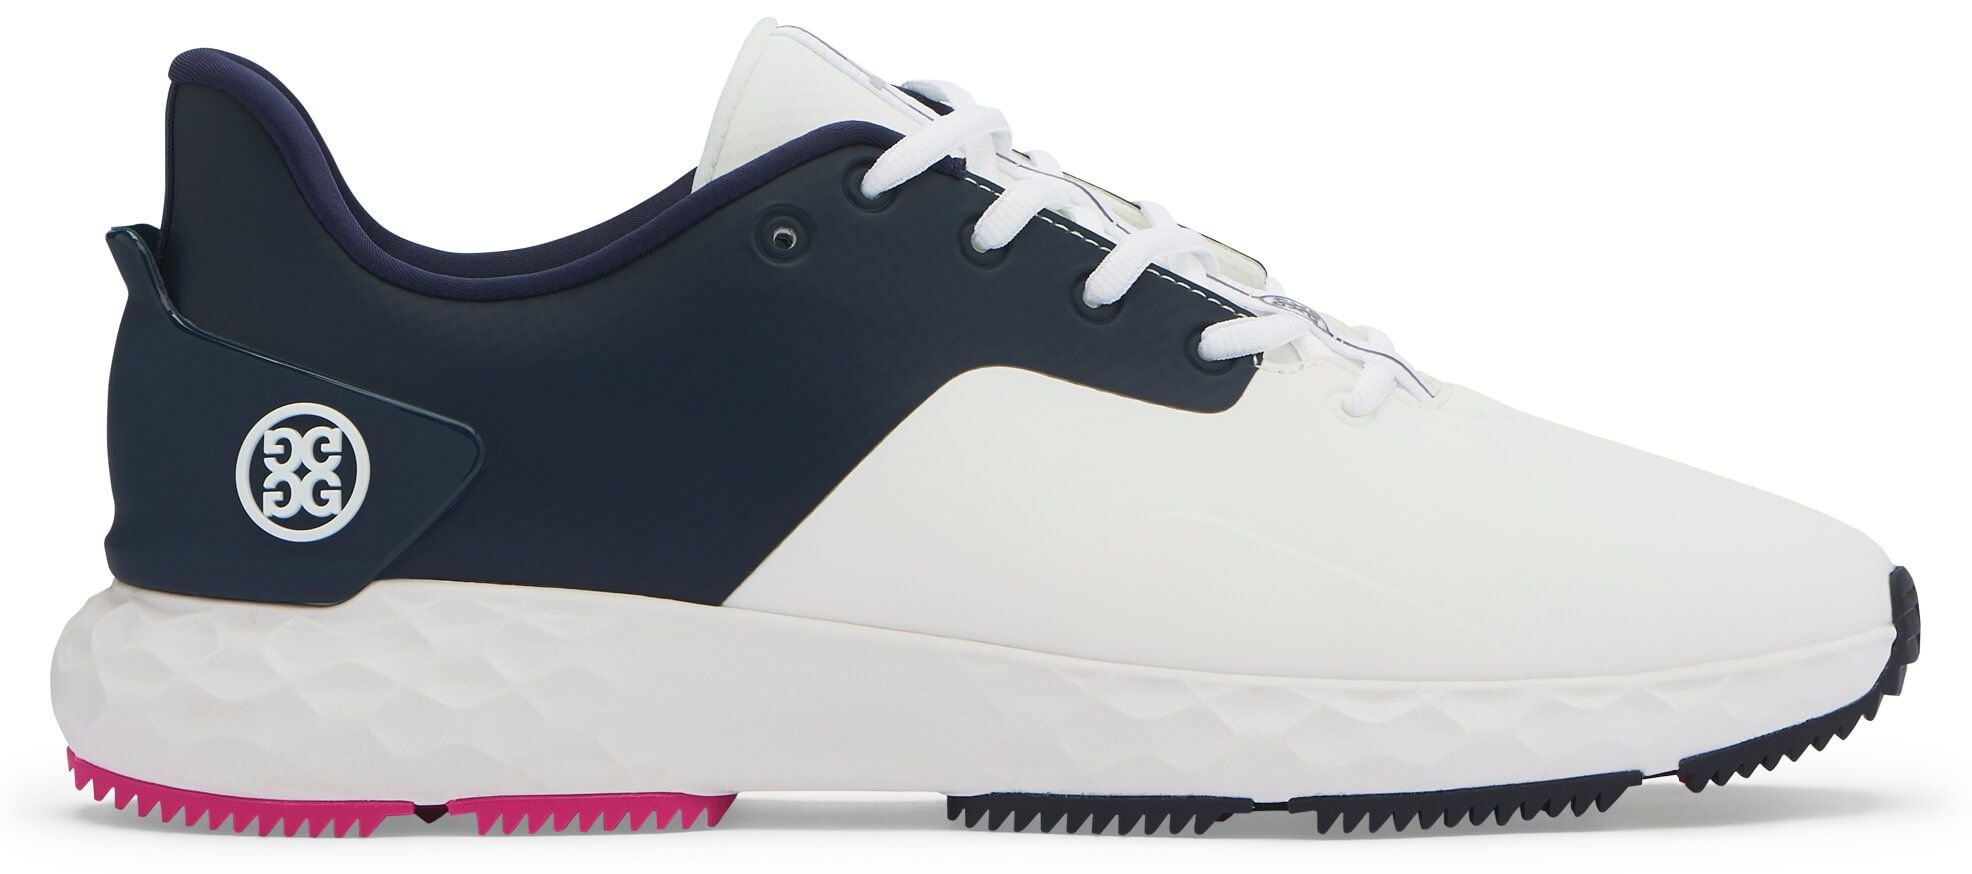 G/FORE Colour Block MG4+ Golf Shoes Twilight - Carl's Golfland